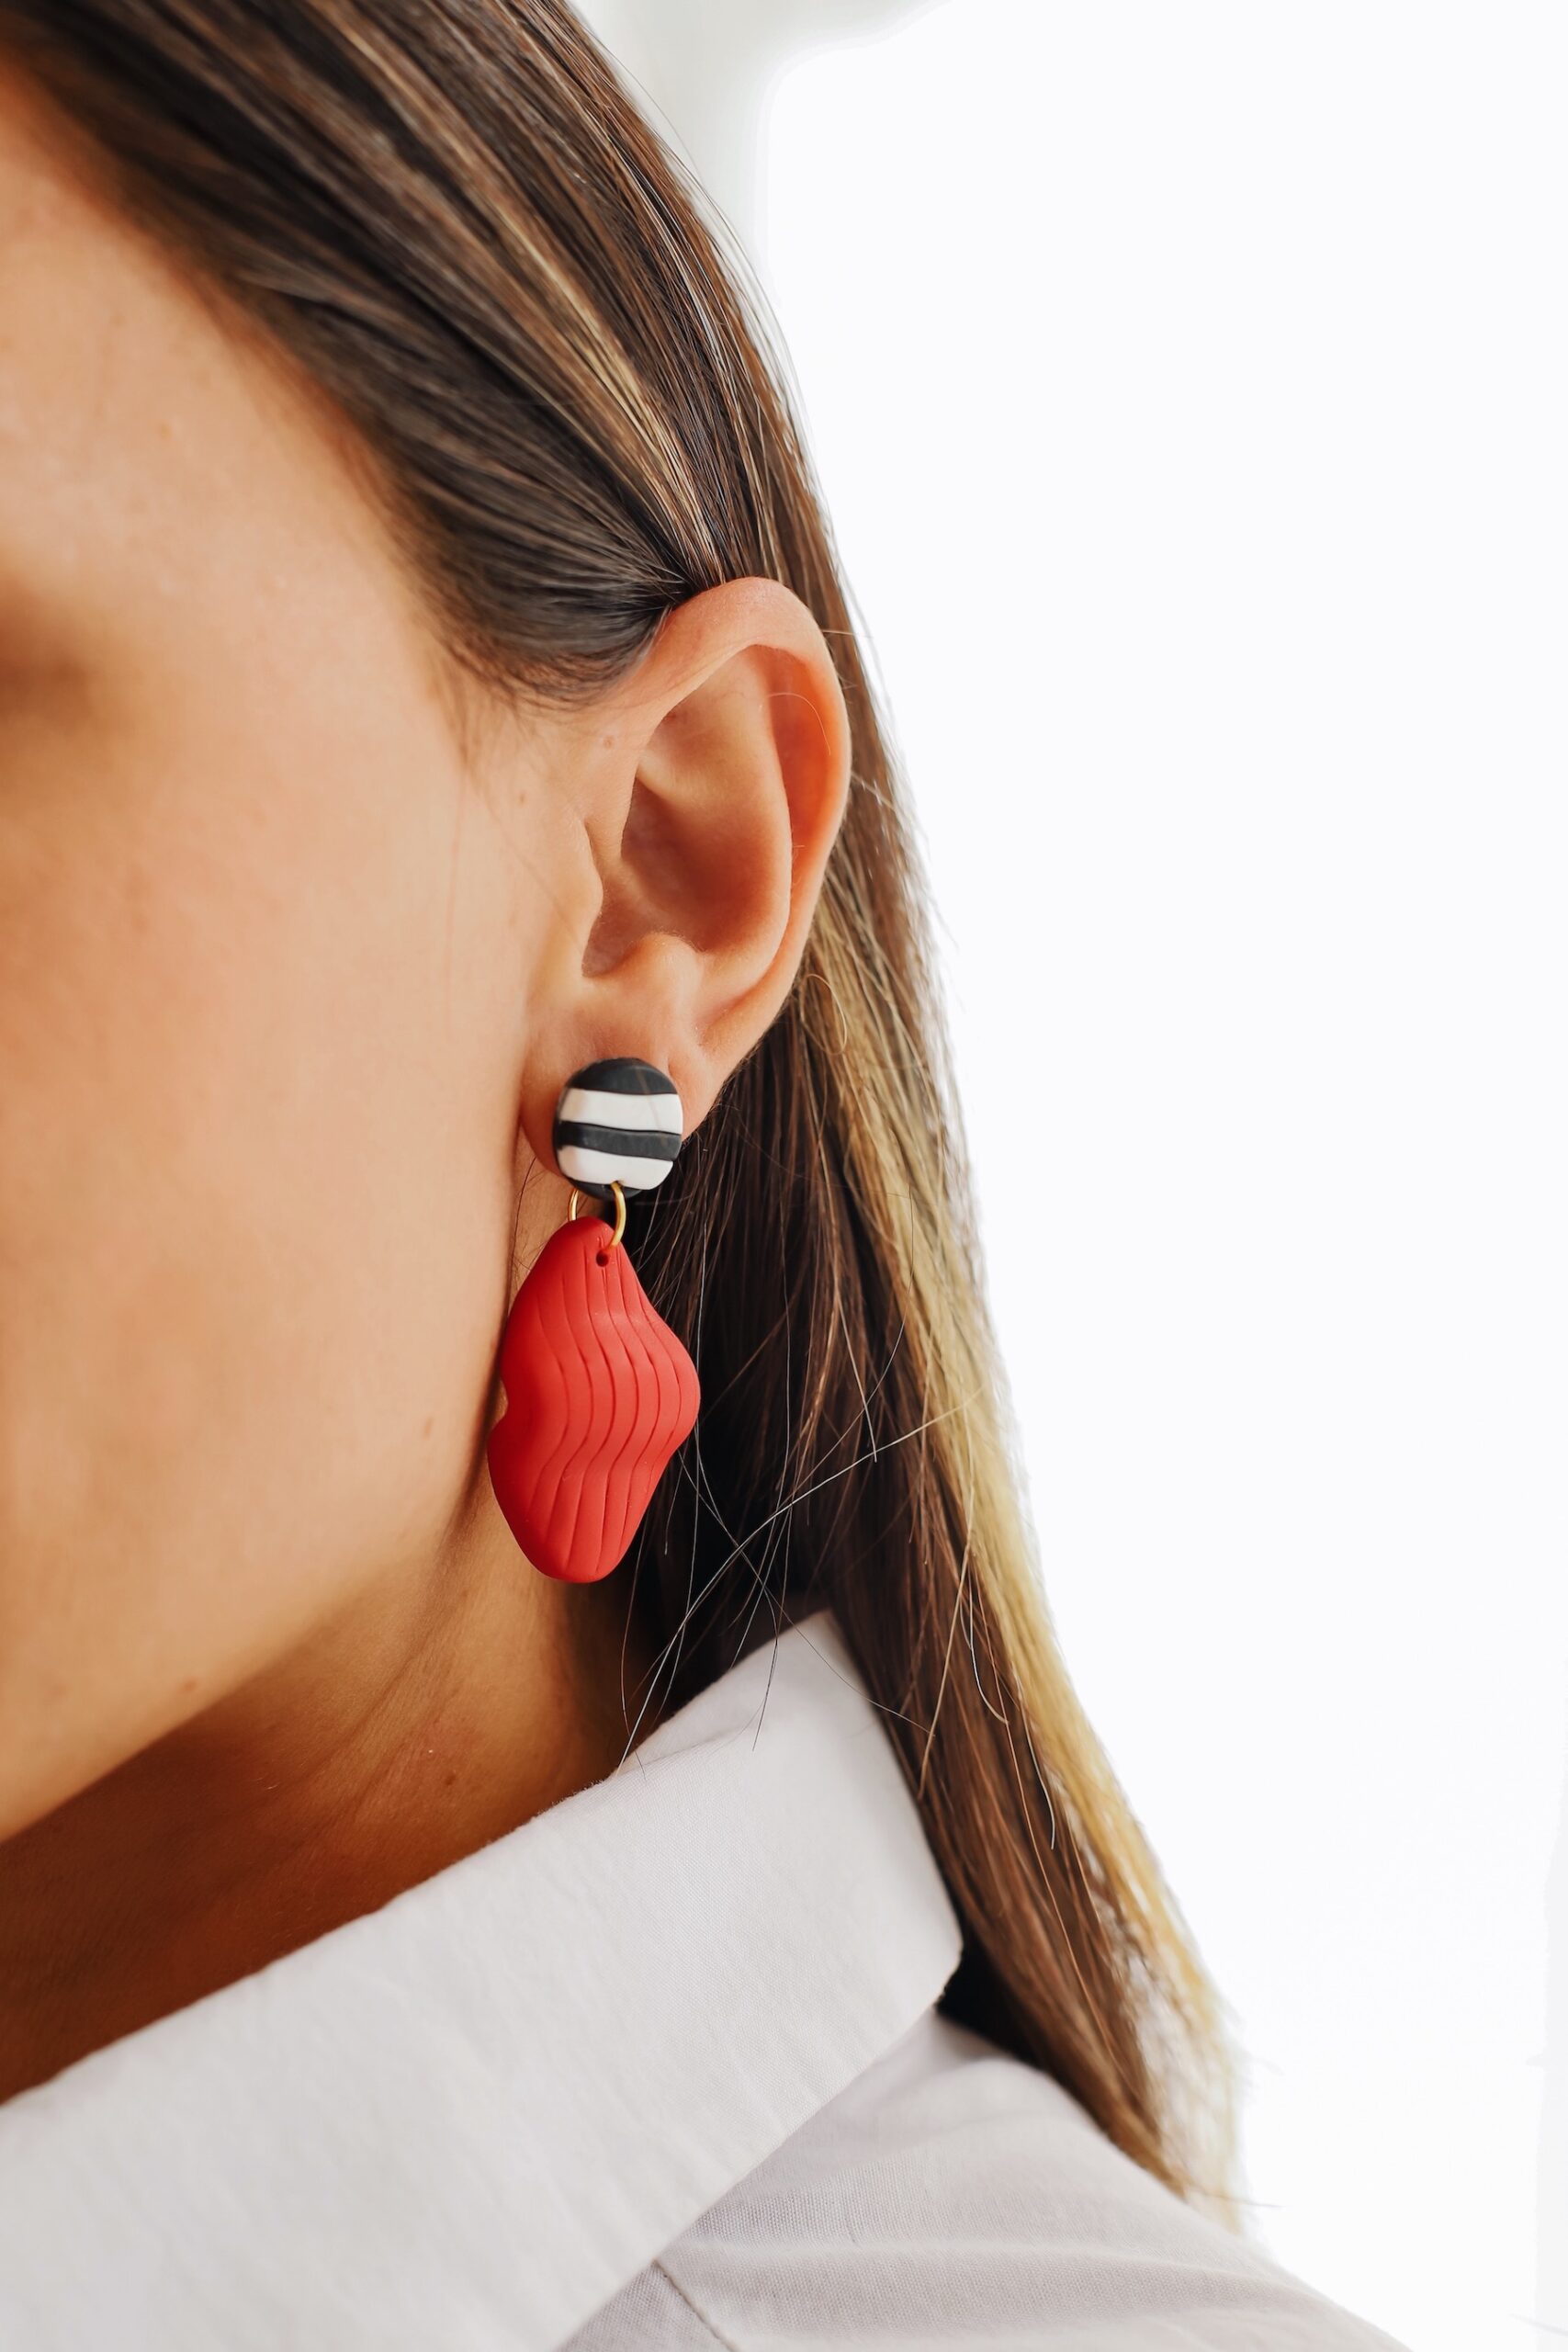 Margaret is an earring was designed by a handmade woman designer. It was made of clay